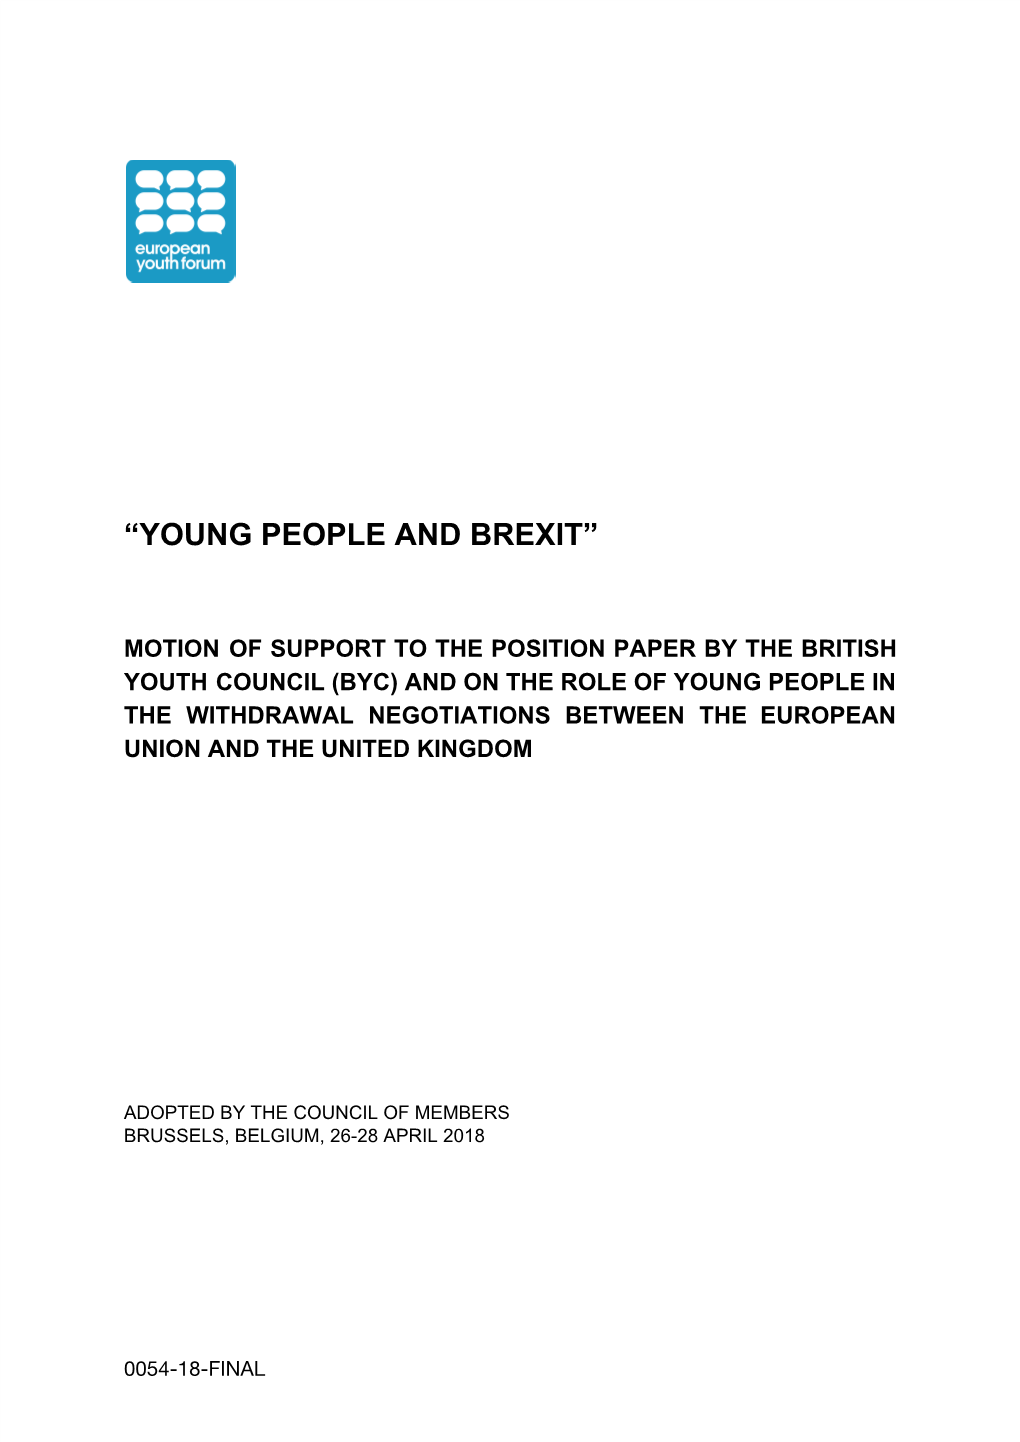 “Young People and Brexit”